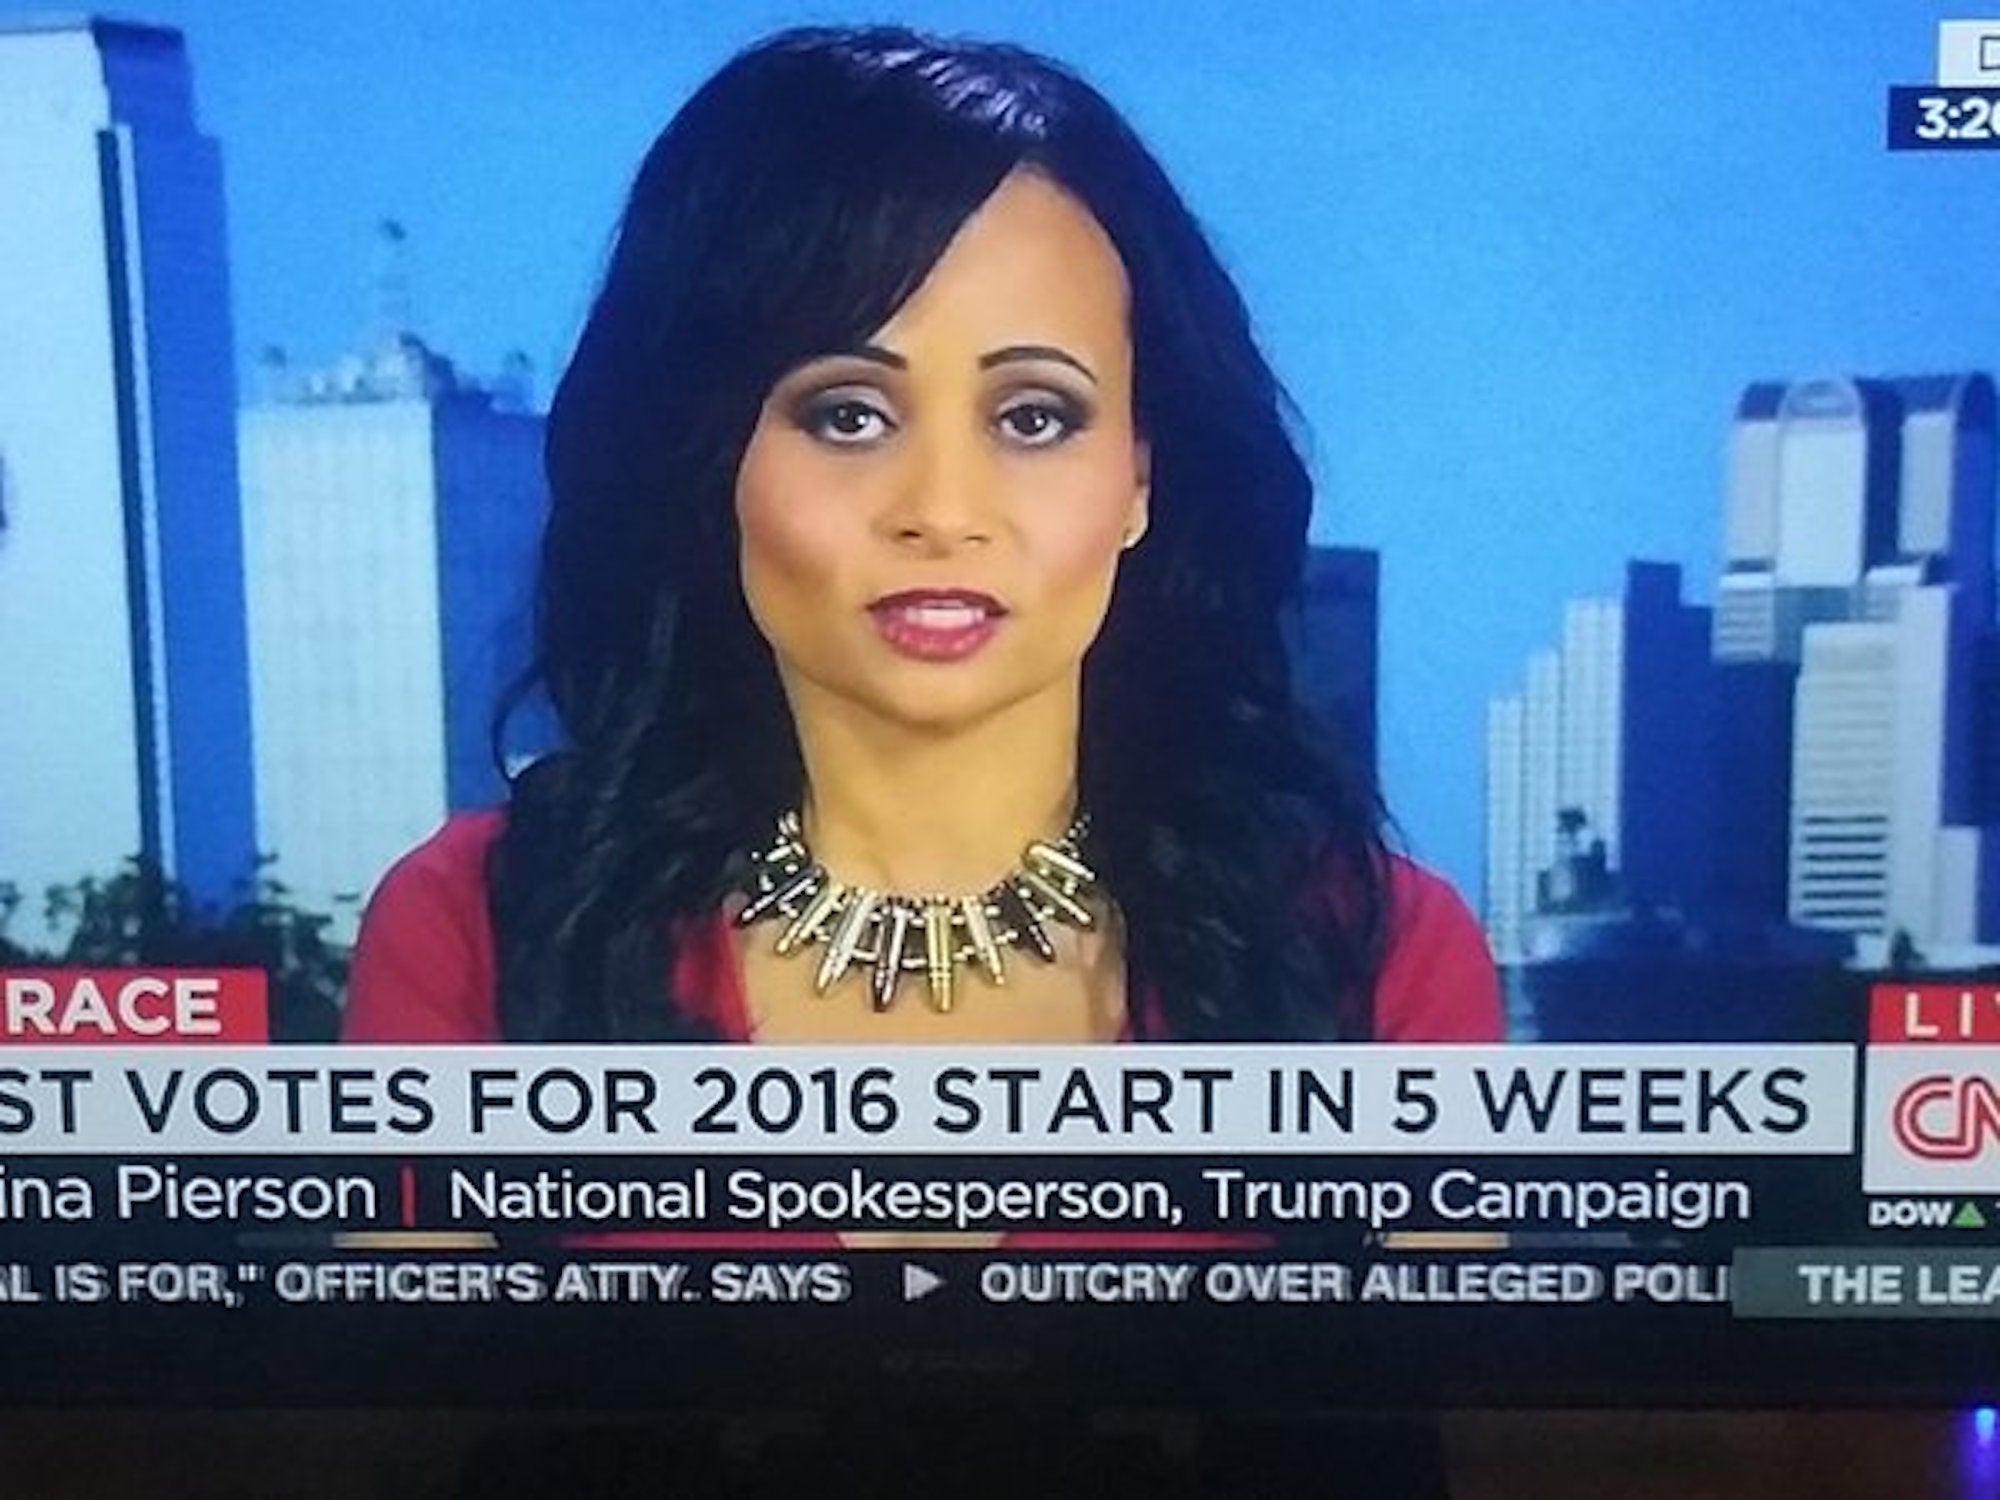 Katrina Pierson, Donald Trump's national spokeswoman, is seen in her CNN interview wearing a necklace made of bullets.